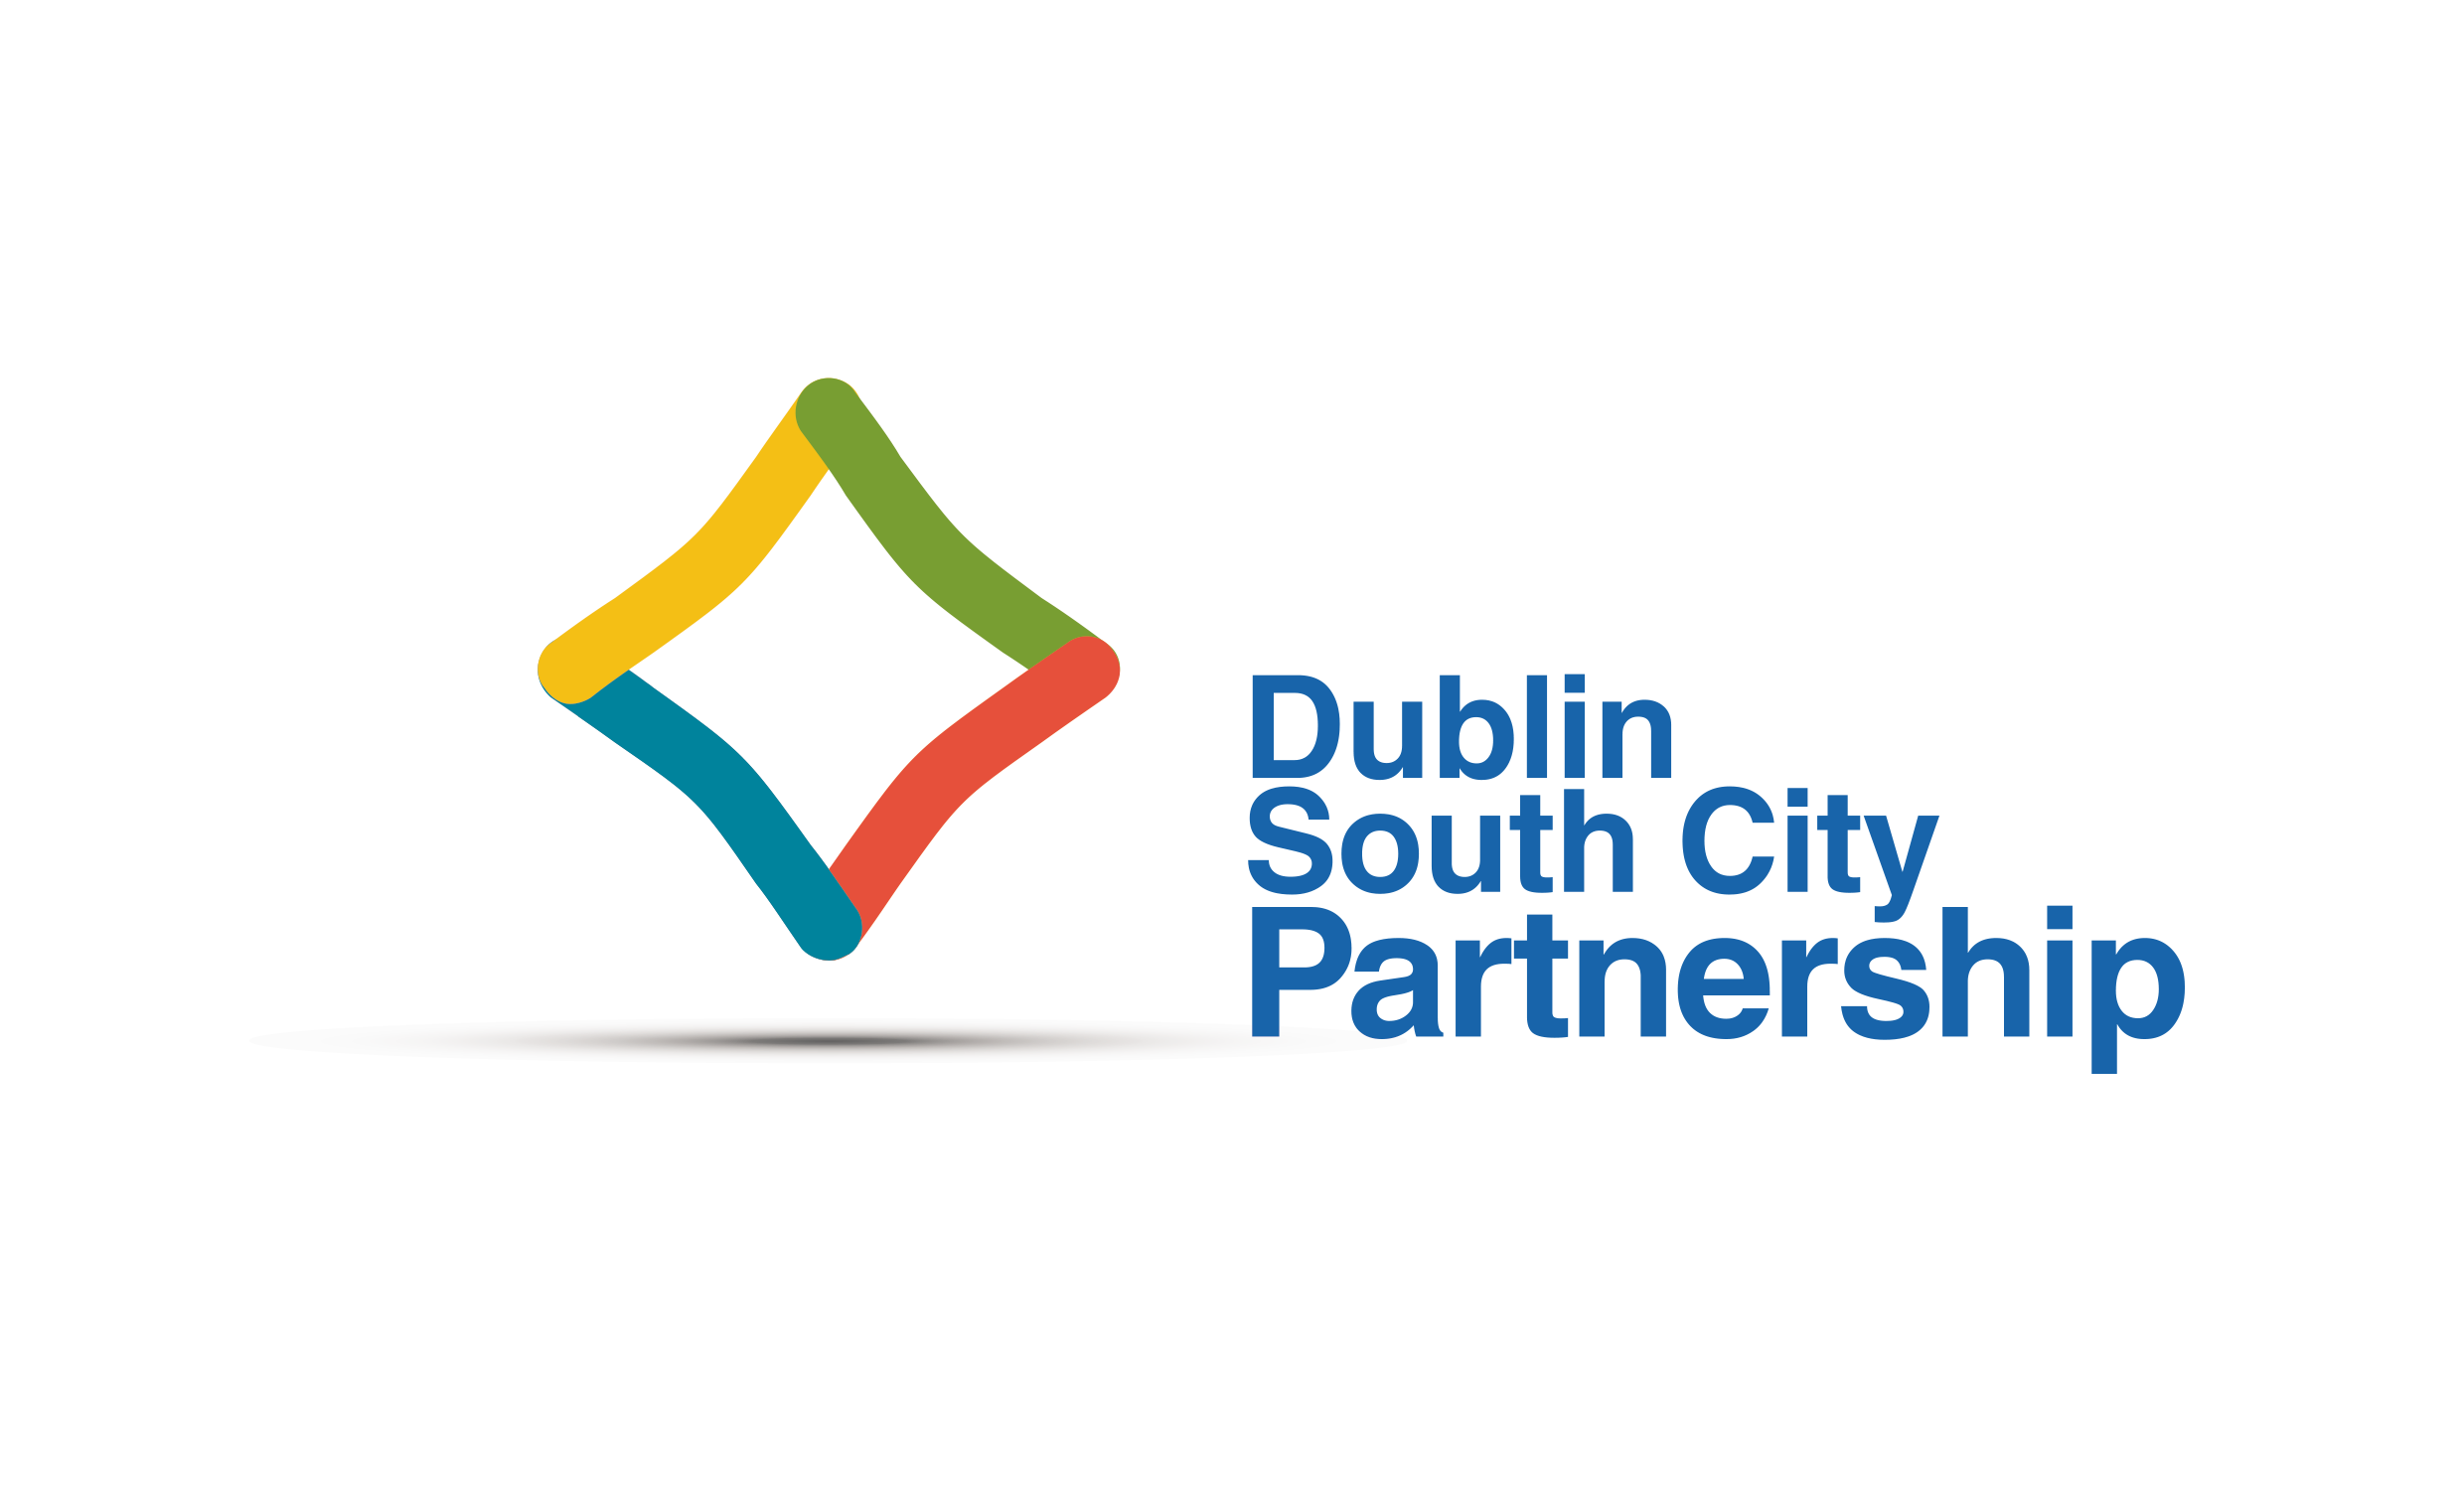 Dublin South City Partnership supported by Rialto Community Network